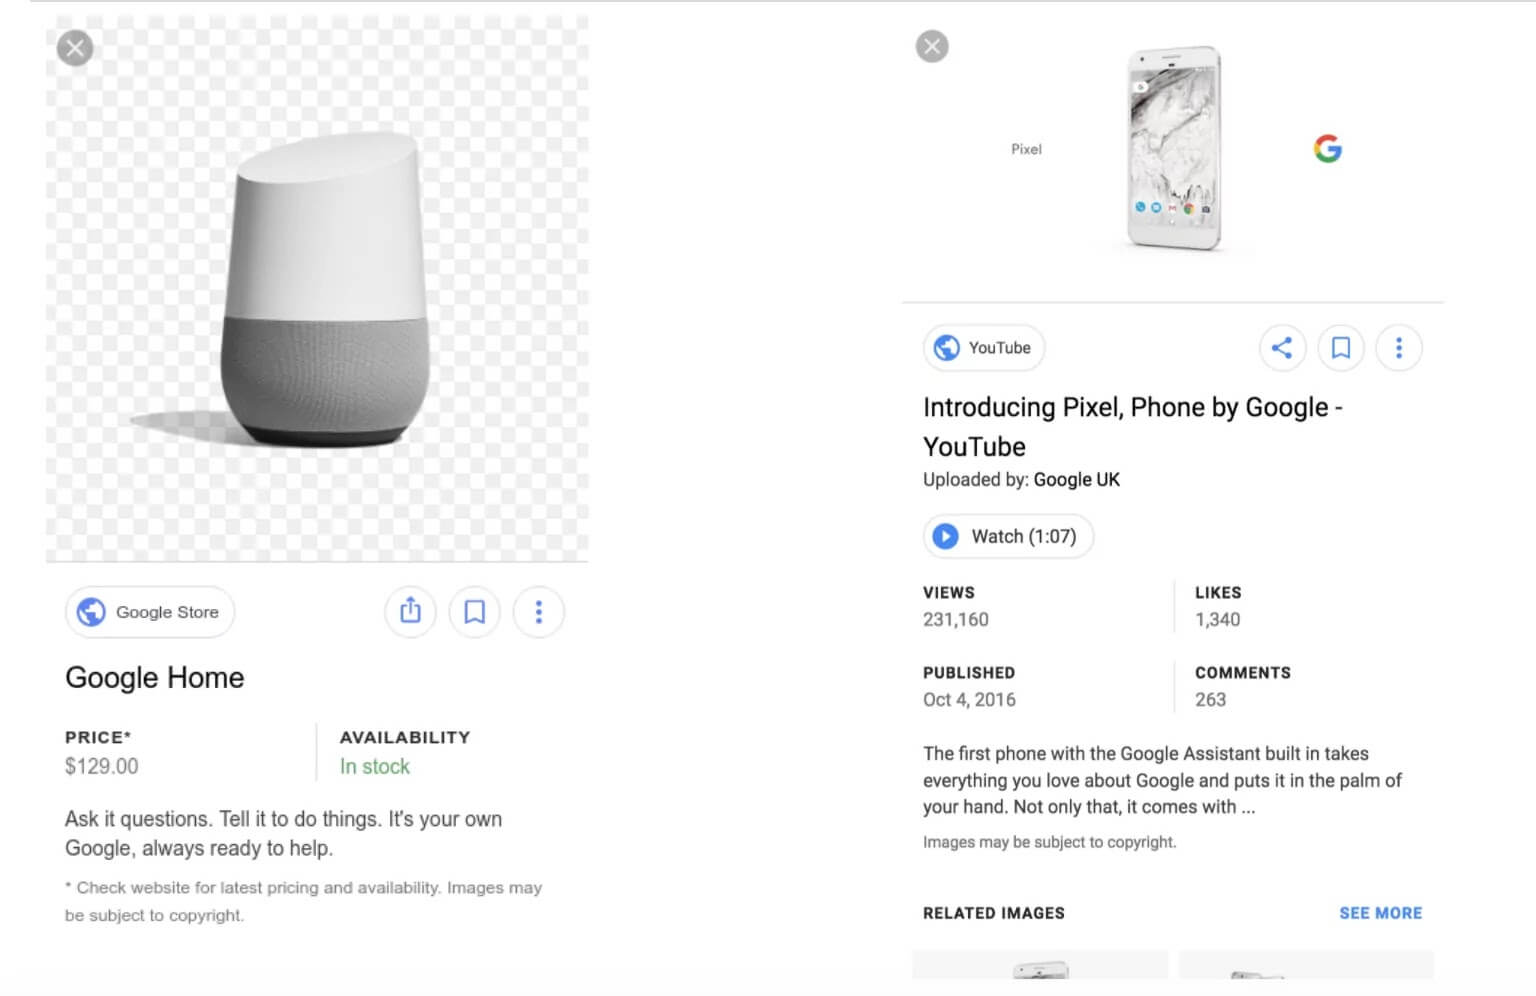 Google Home device and Google Pixel displayed with rich snippets on search results